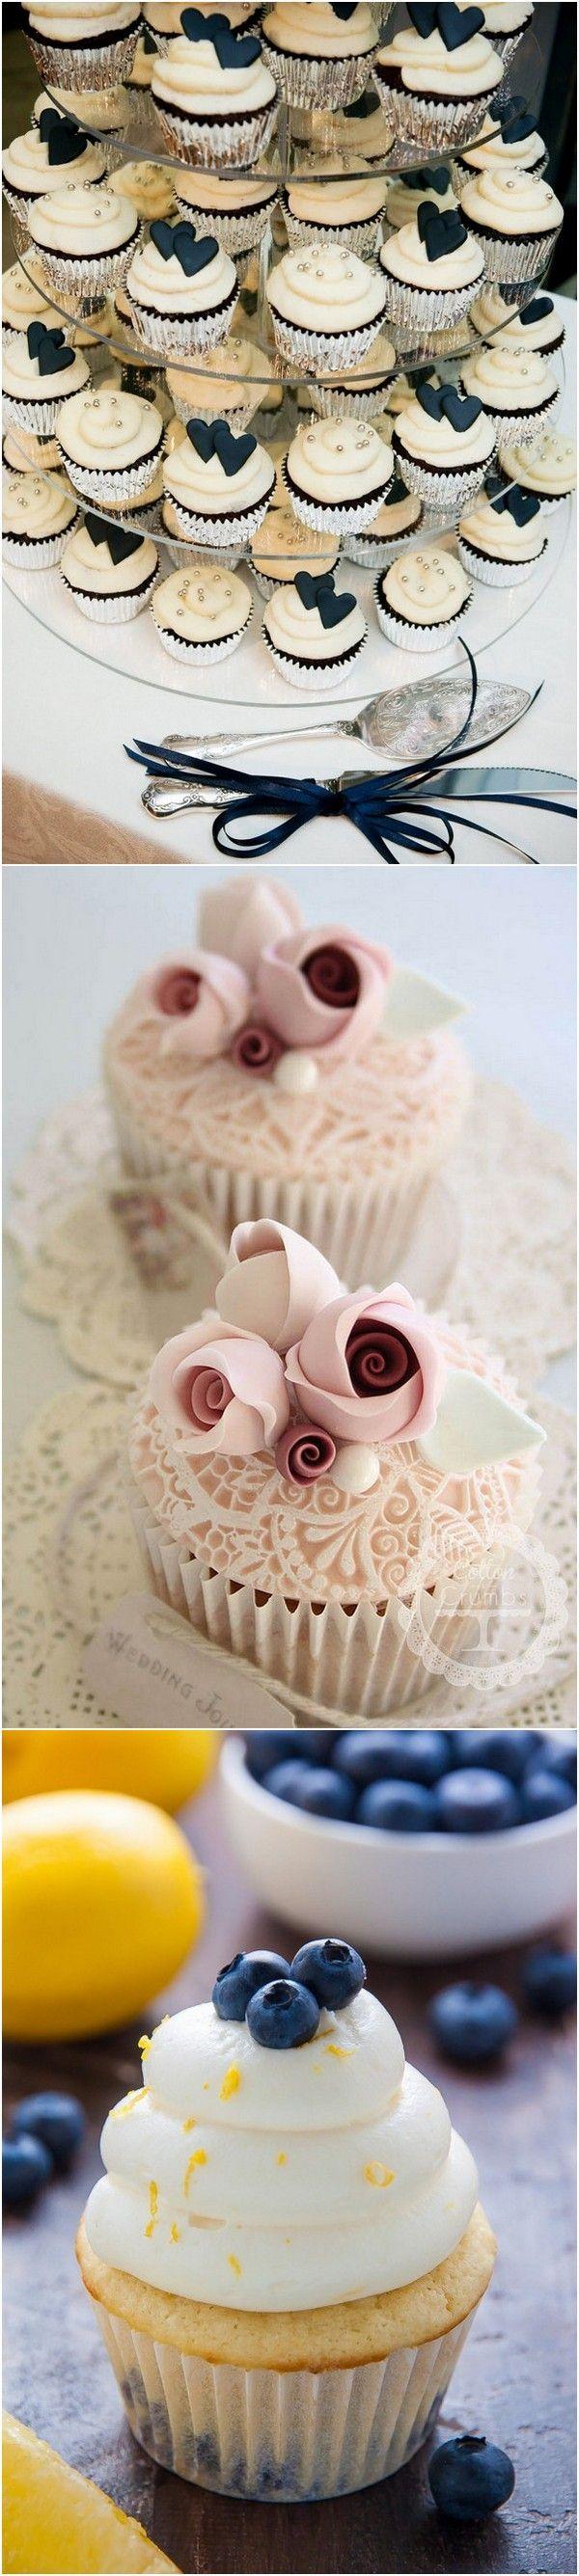 Hochzeit - 24 Creative Wedding Cupcake Ideas For Your Big Day - Page 2 Of 3